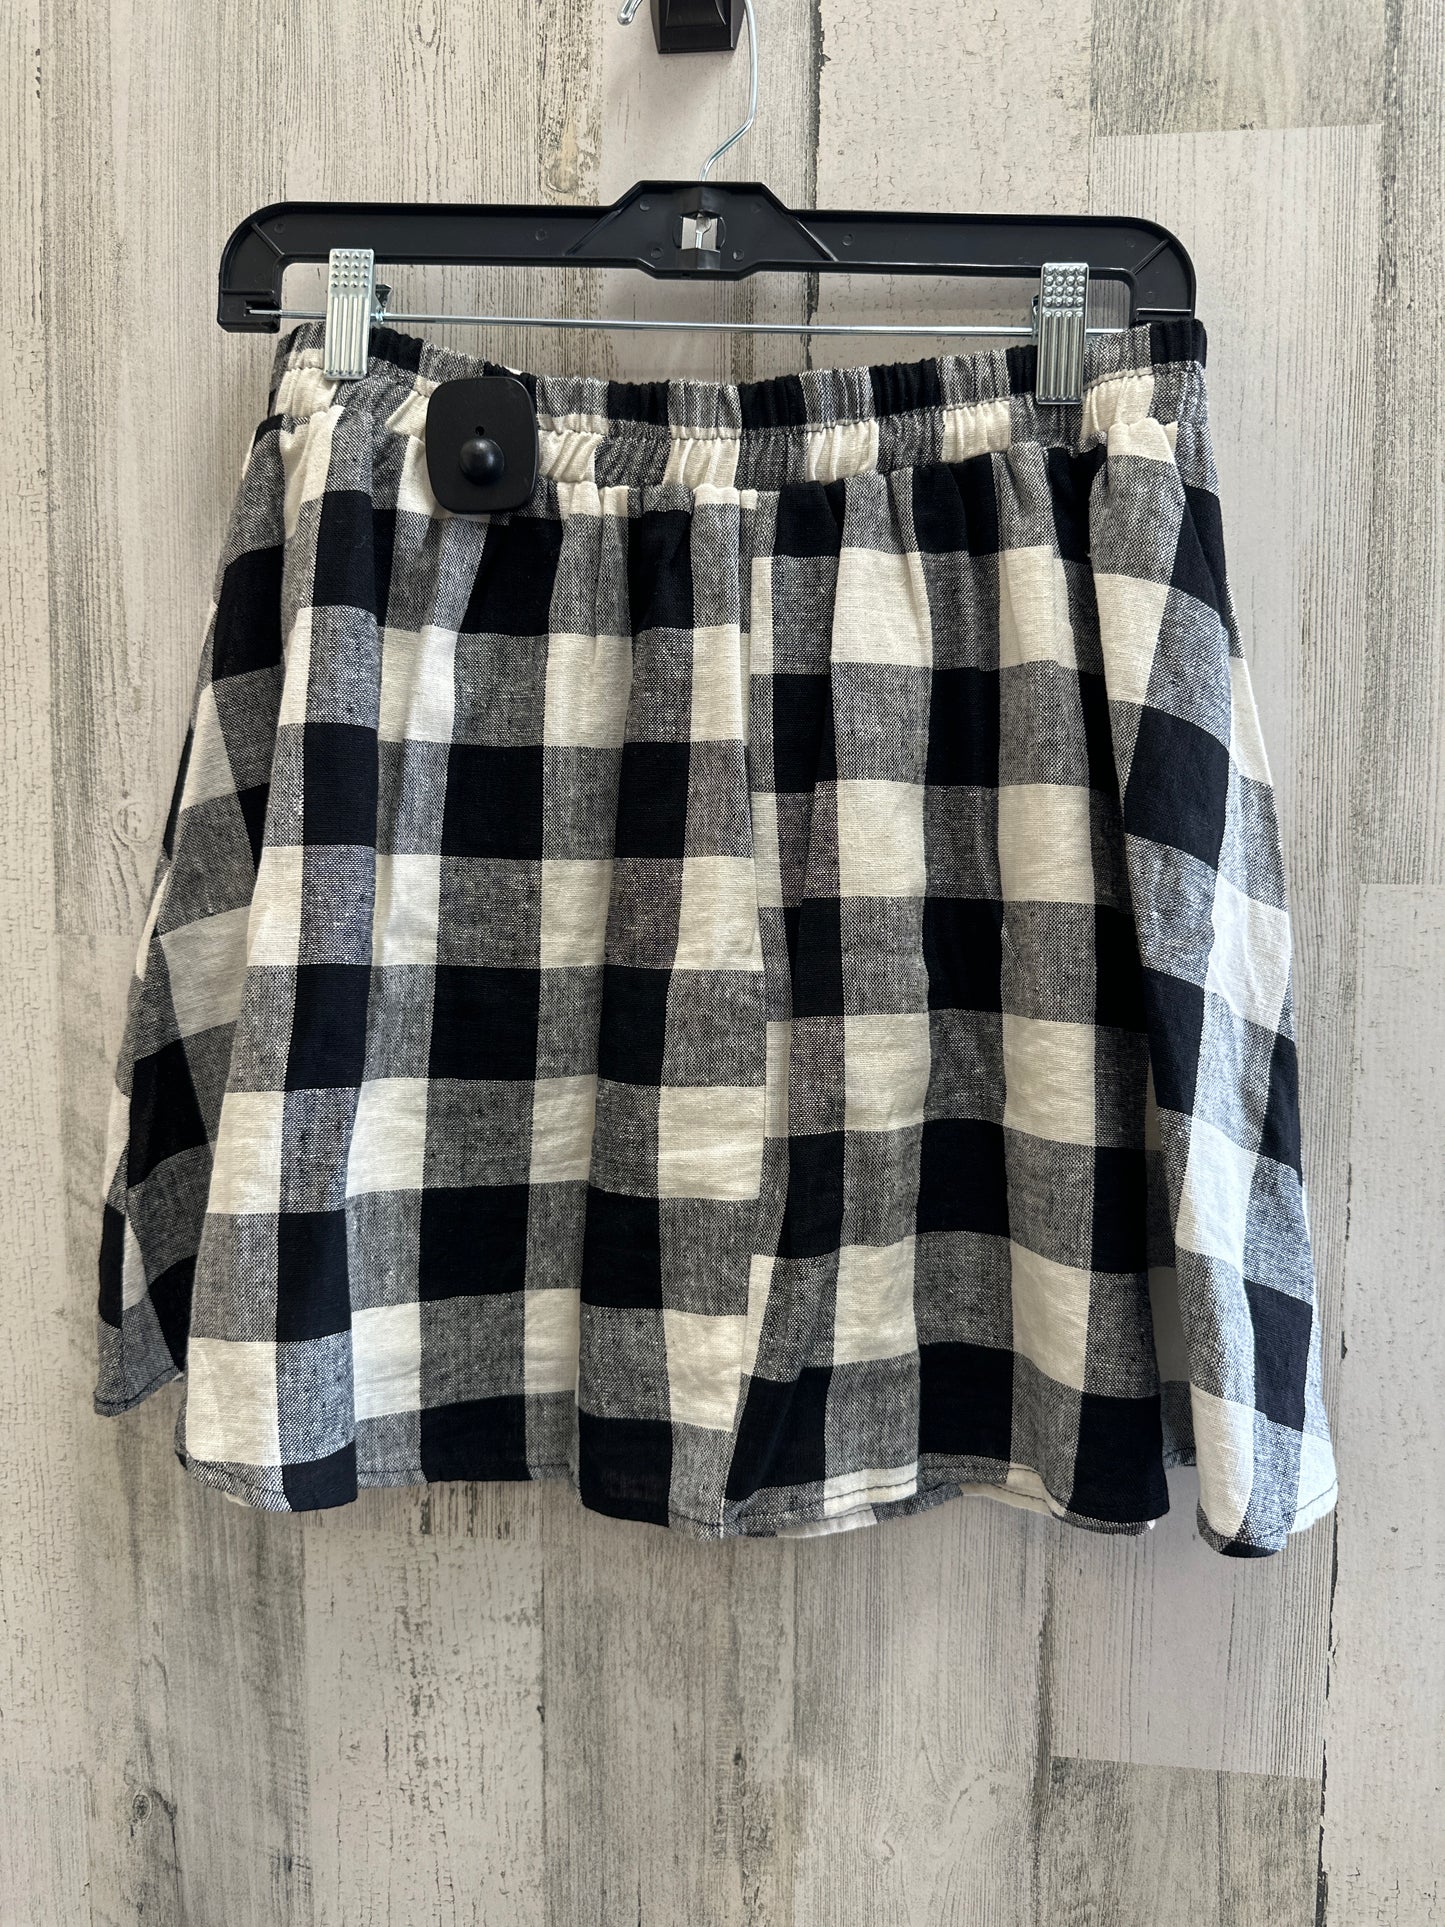 Skirt Mini & Short By Everly  Size: 8